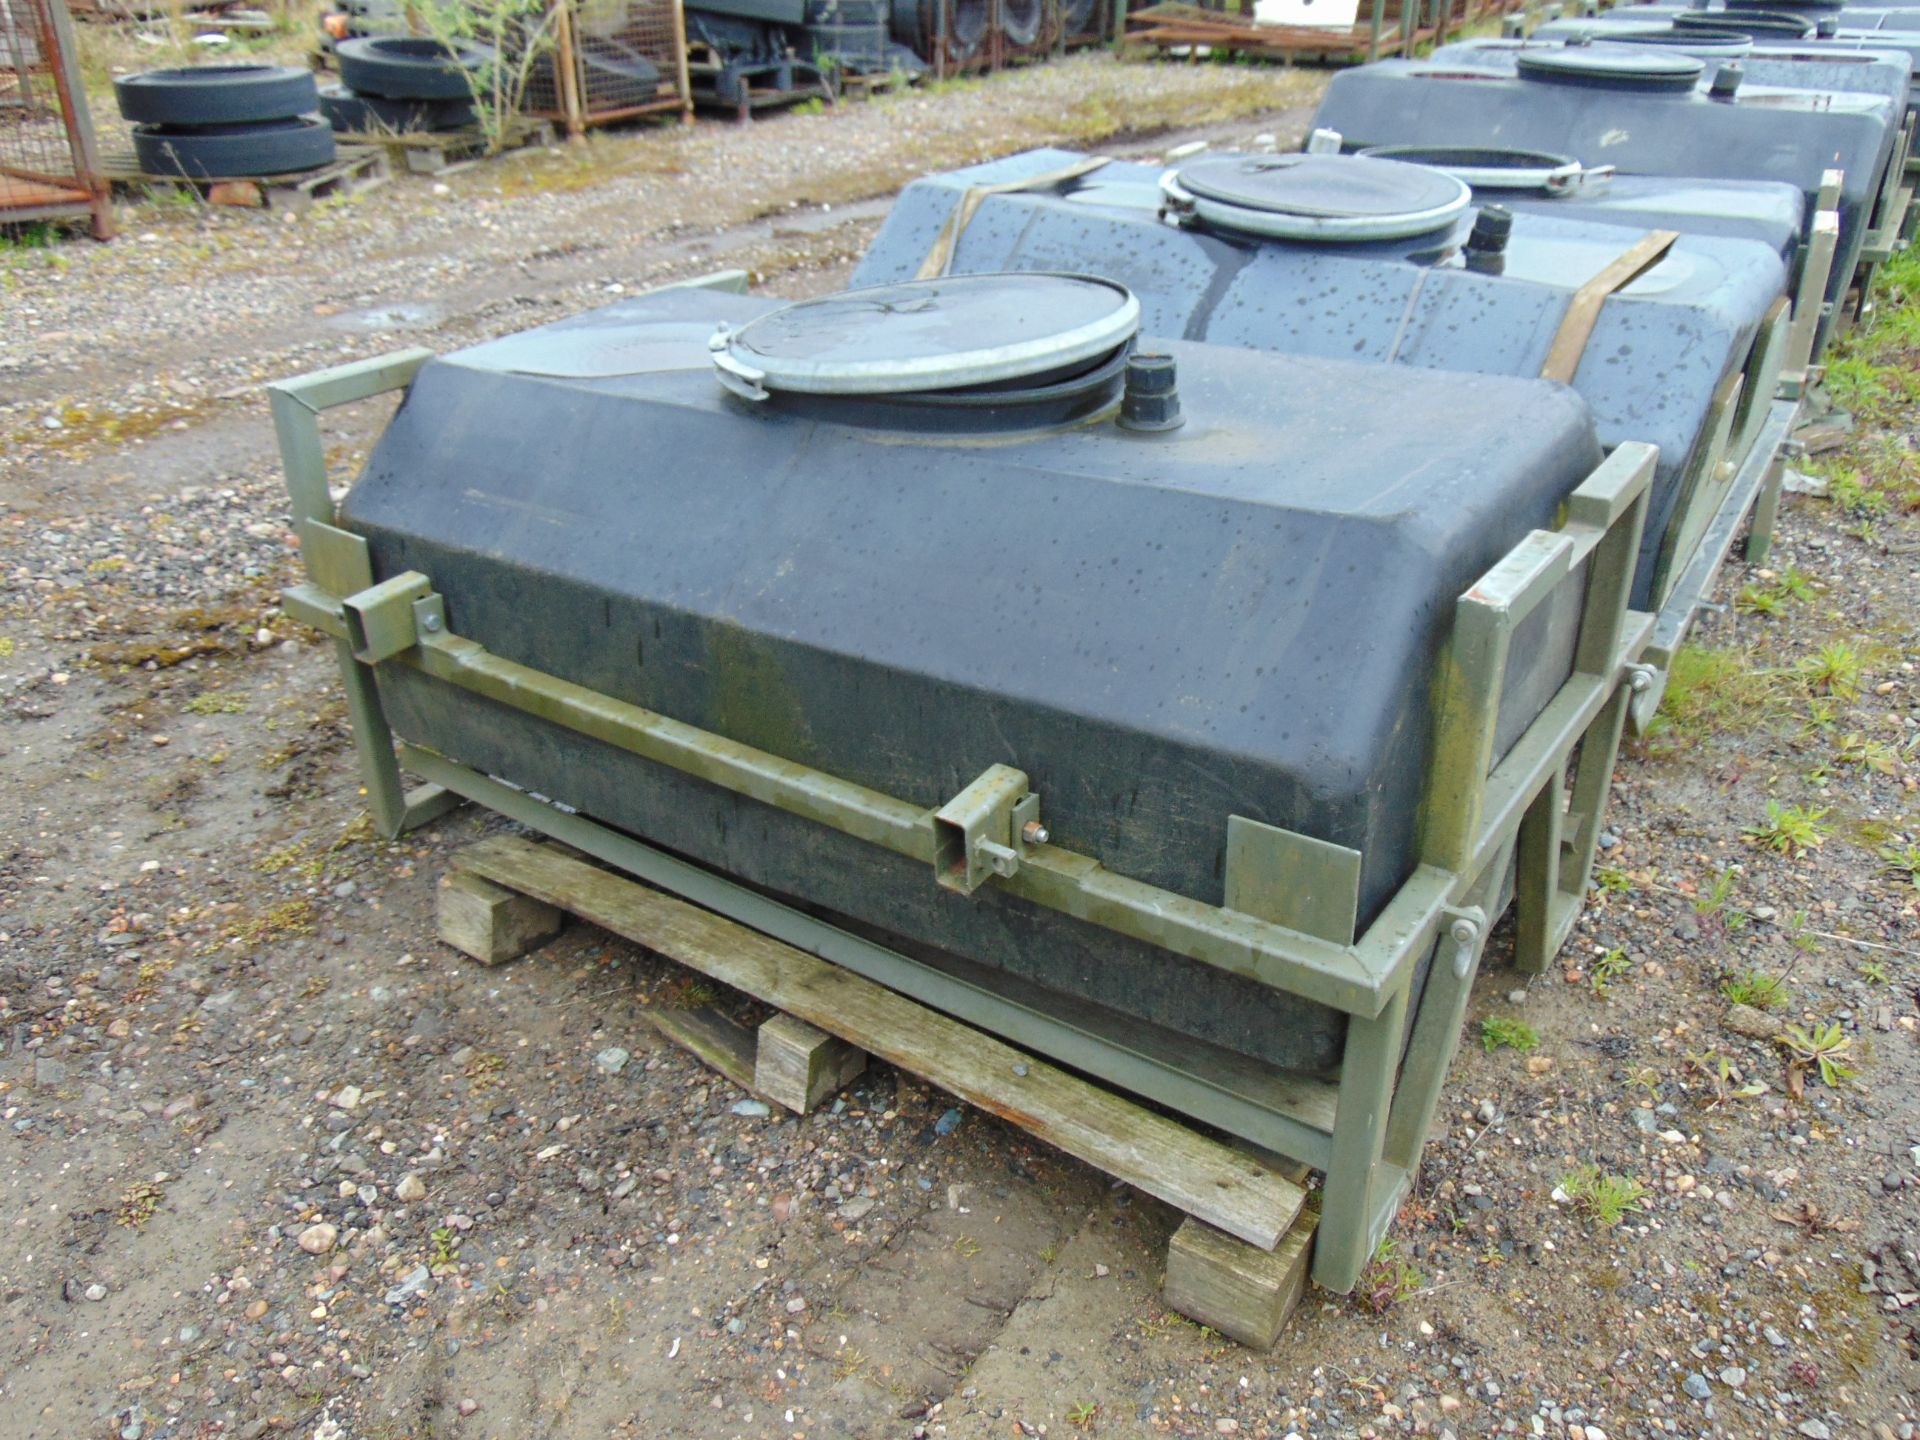 1 x Demountable 100 Gall Water Bowser c/w Frame for Fitting to Land Rover Trailer - Image 2 of 3